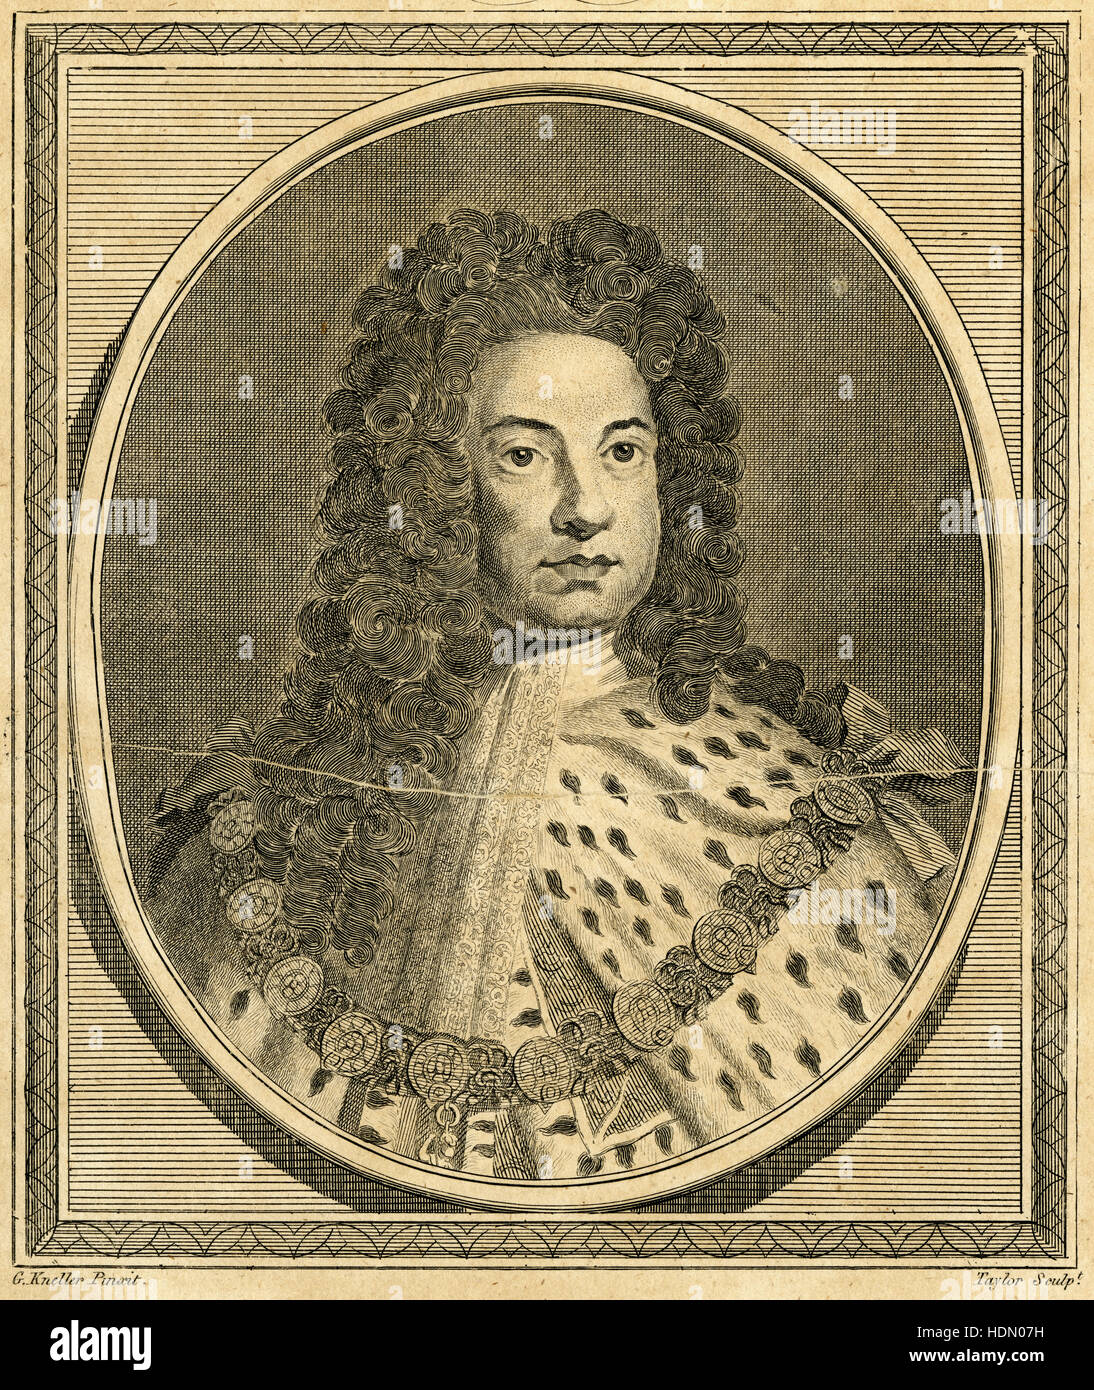 Antique 1788 engraving, King George I. George I (1660-1727) was King of Great Britain and Ireland from 1 August 1714 until his death, and ruler of the Duchy and Electorate of Brunswick-Lüneburg (Hanover) in the Holy Roman Empire from 1698. SOURCE: ORIGINAL ENGRAVING. Stock Photo